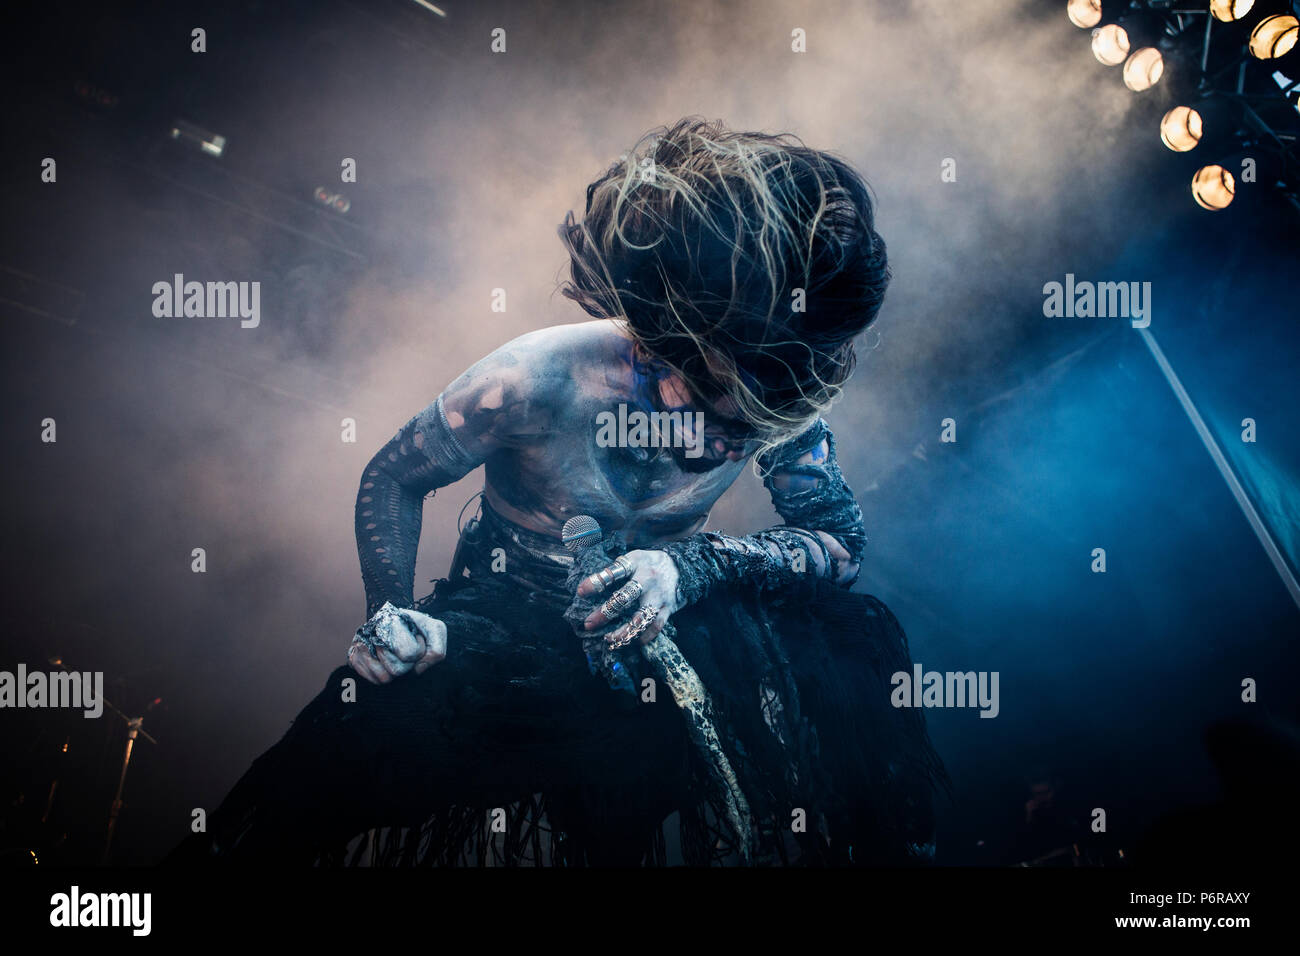 Copenhell 2018 High Resolution Stock Photography and Images - Alamy